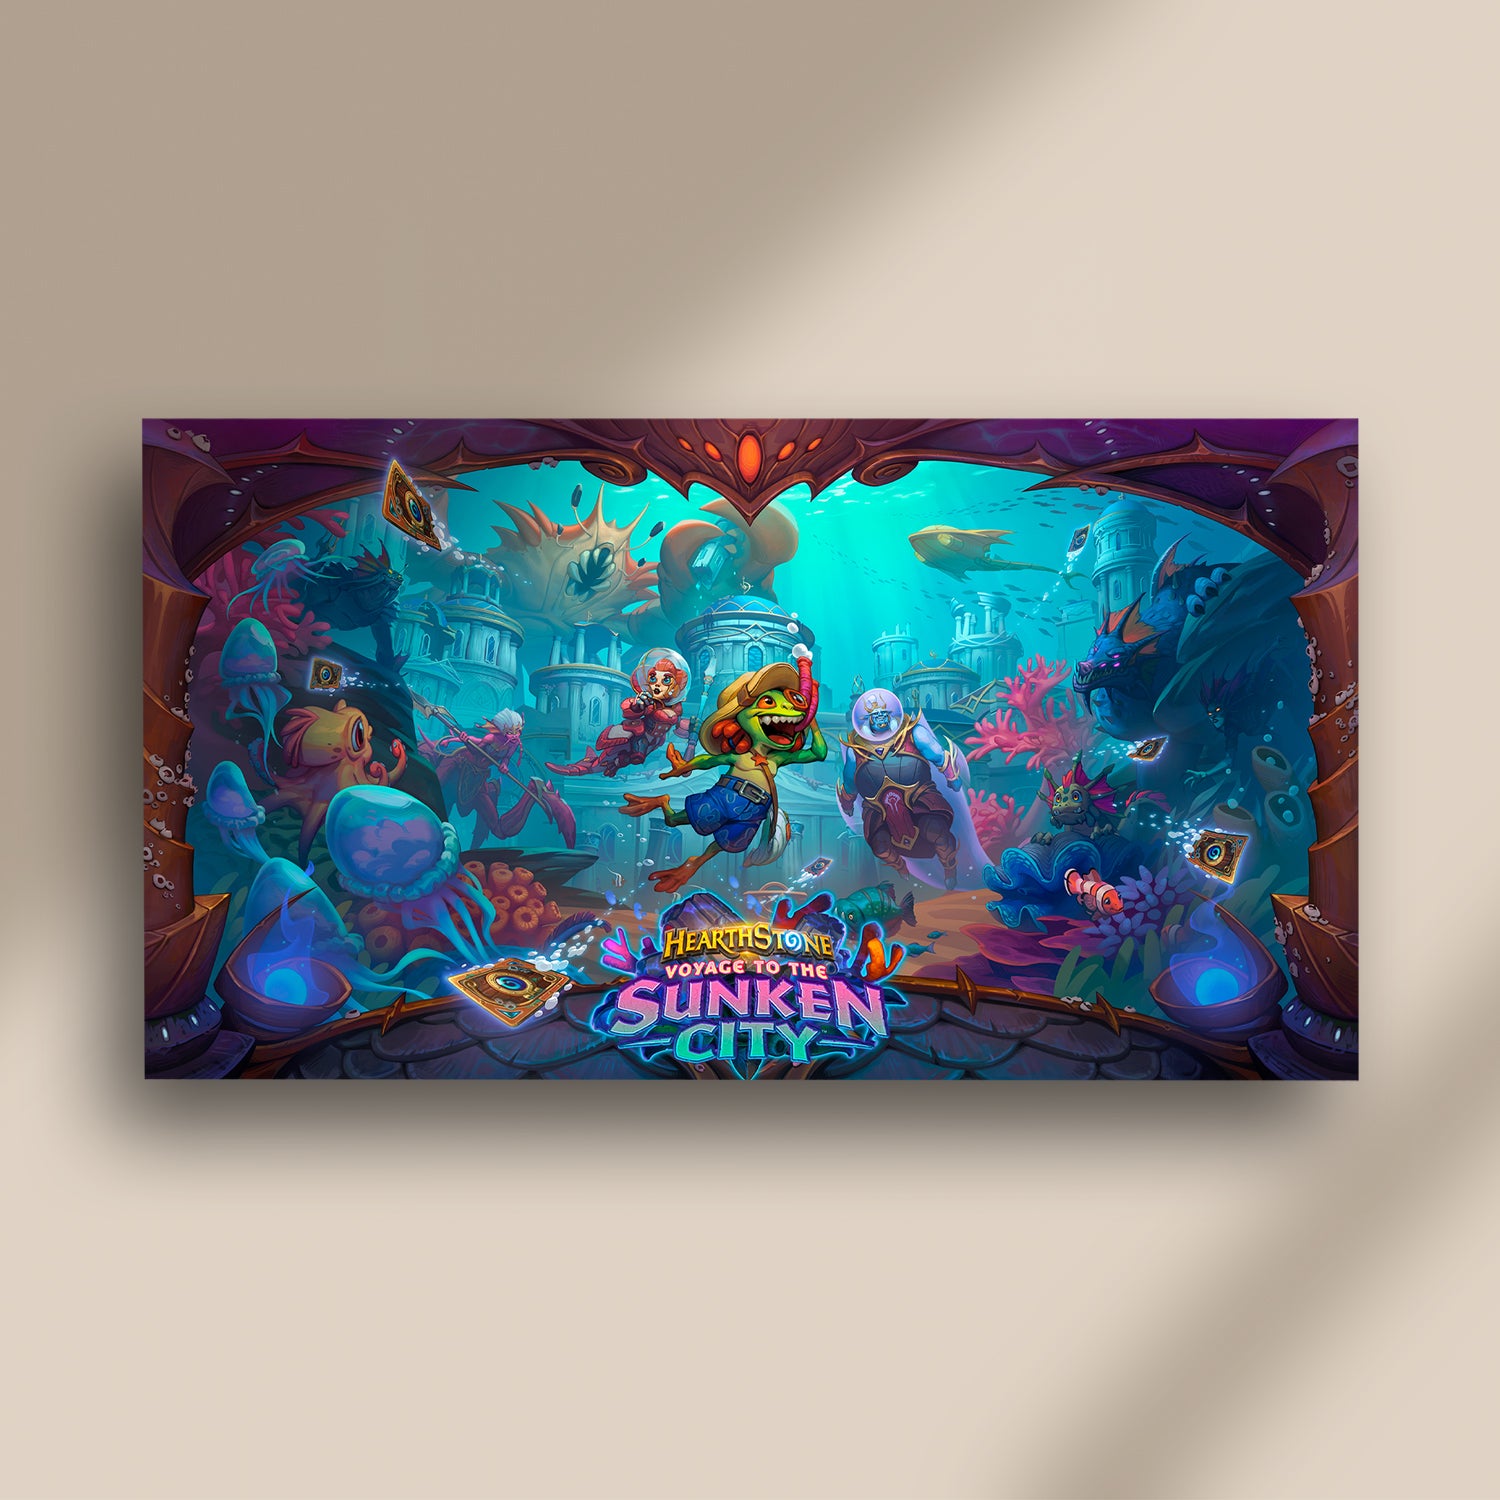 Hearthstone: Voyage to the Sunken City 14" x 25" Canvas - Front View with Art Print on the Wall